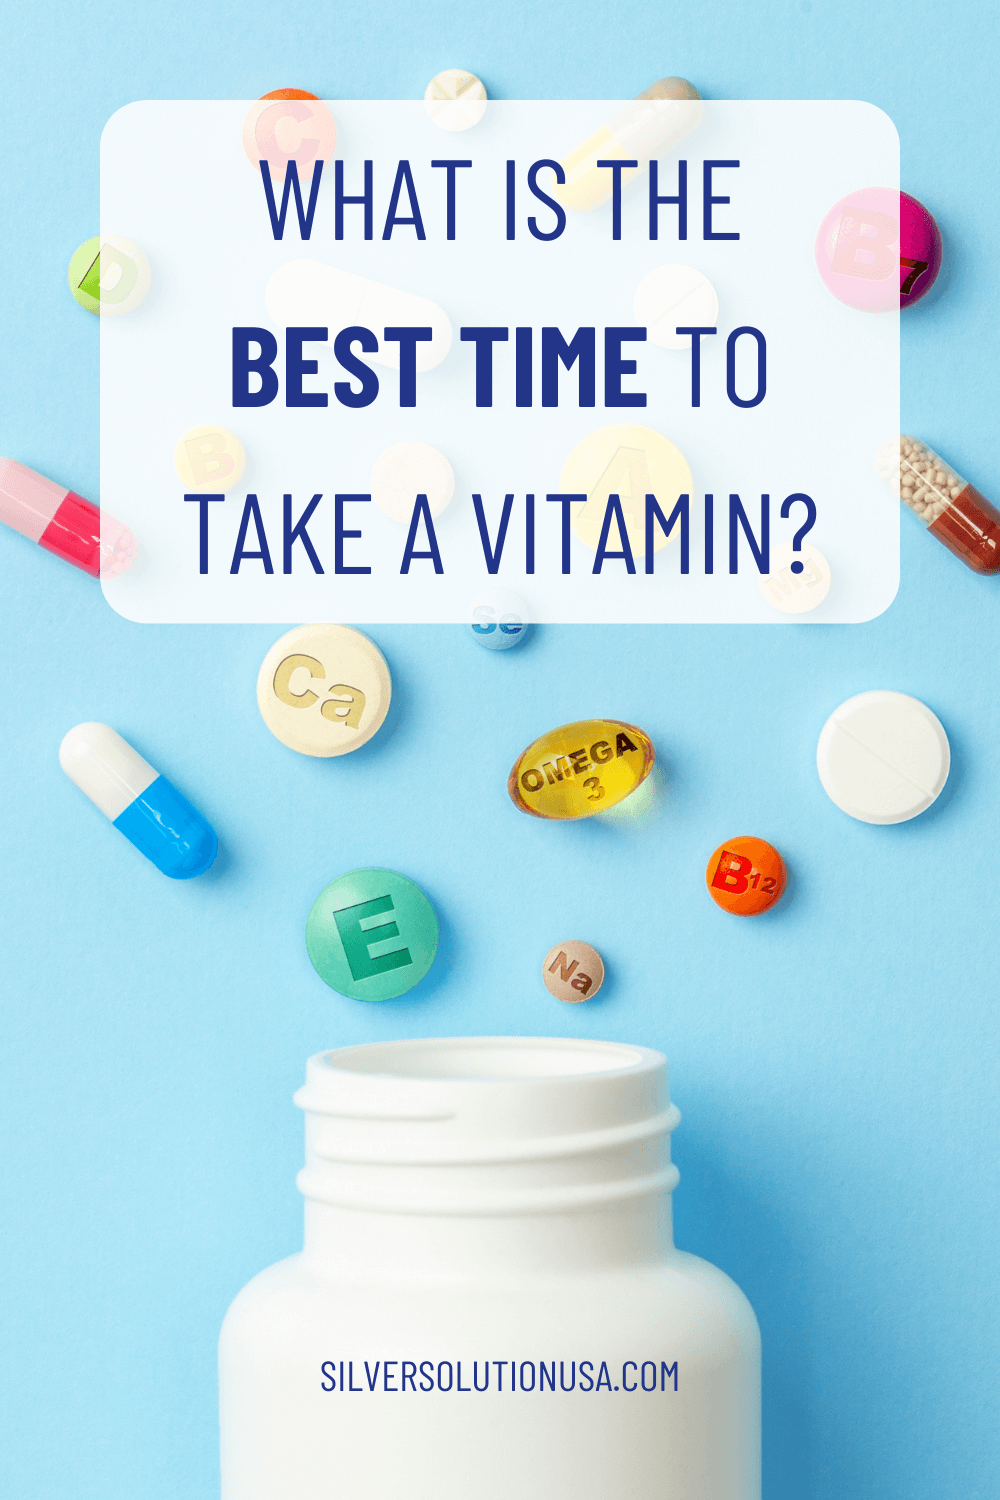 What Is the Best Time to Take a Vitamin? - Silver Solution USA LLC